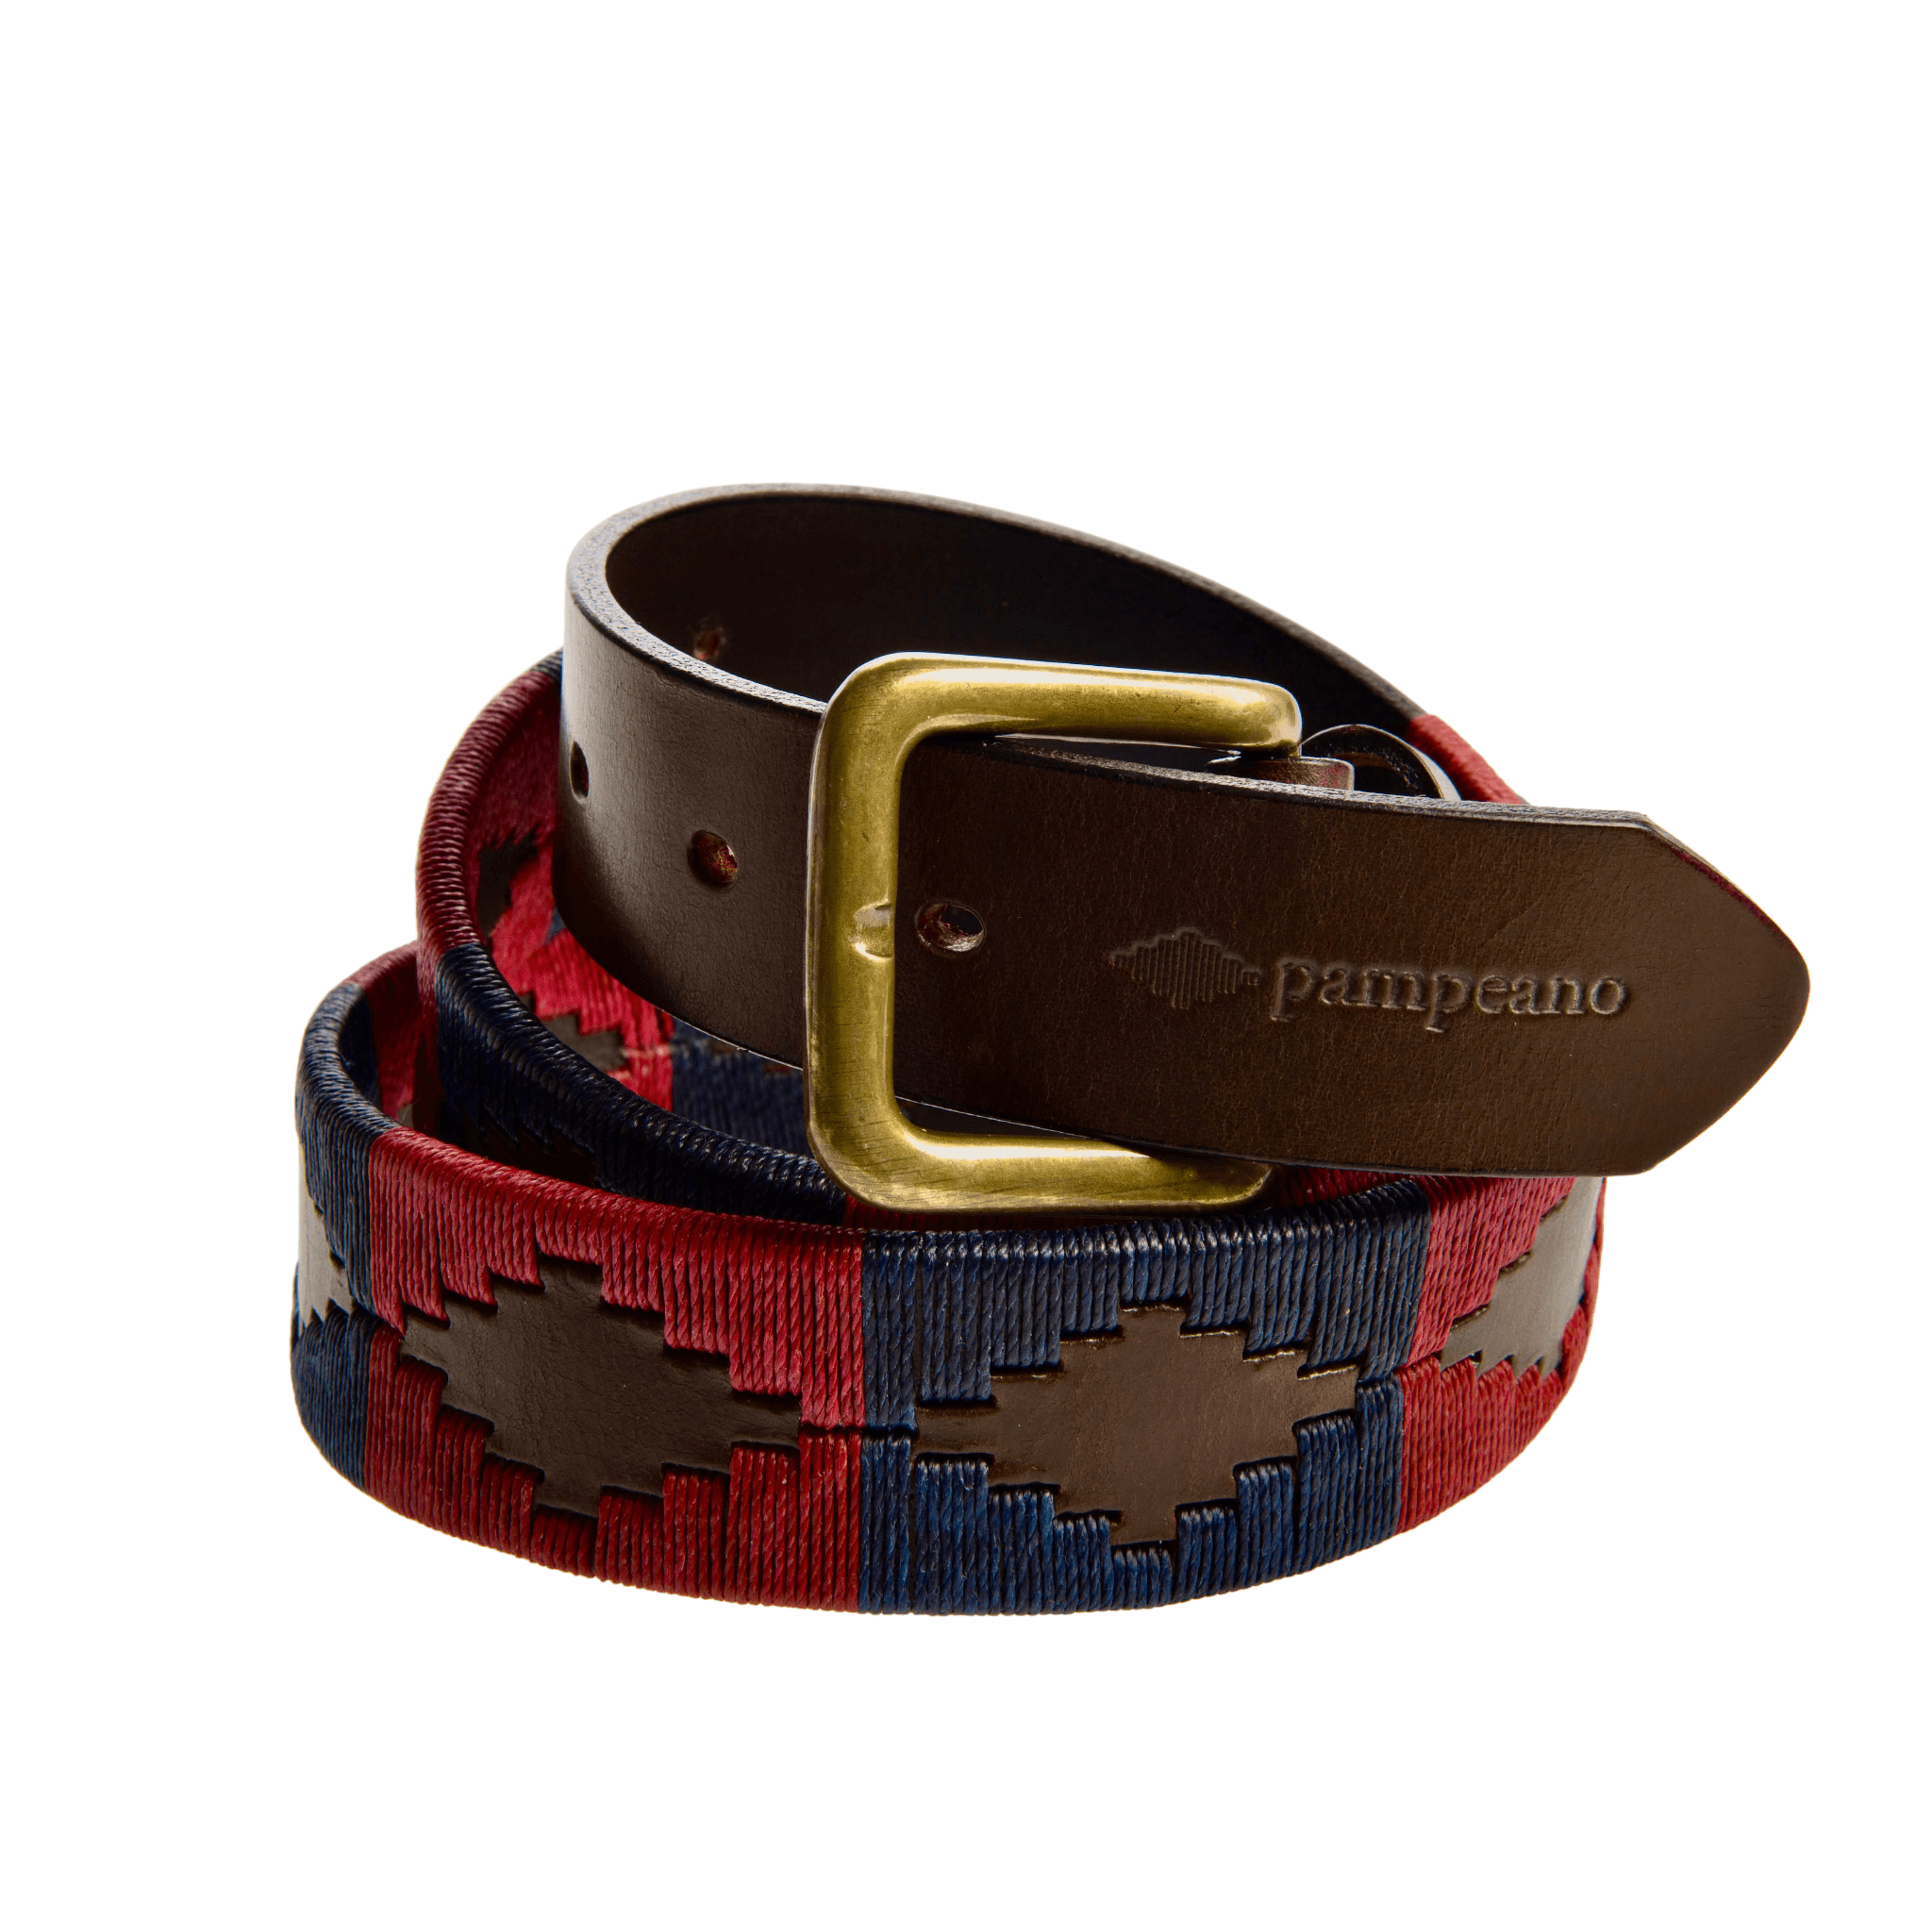 Close-up of the Country Direct & Pampeano Household Division Leather Polo Belt, featuring brown leather, with red and navy thread detailing.